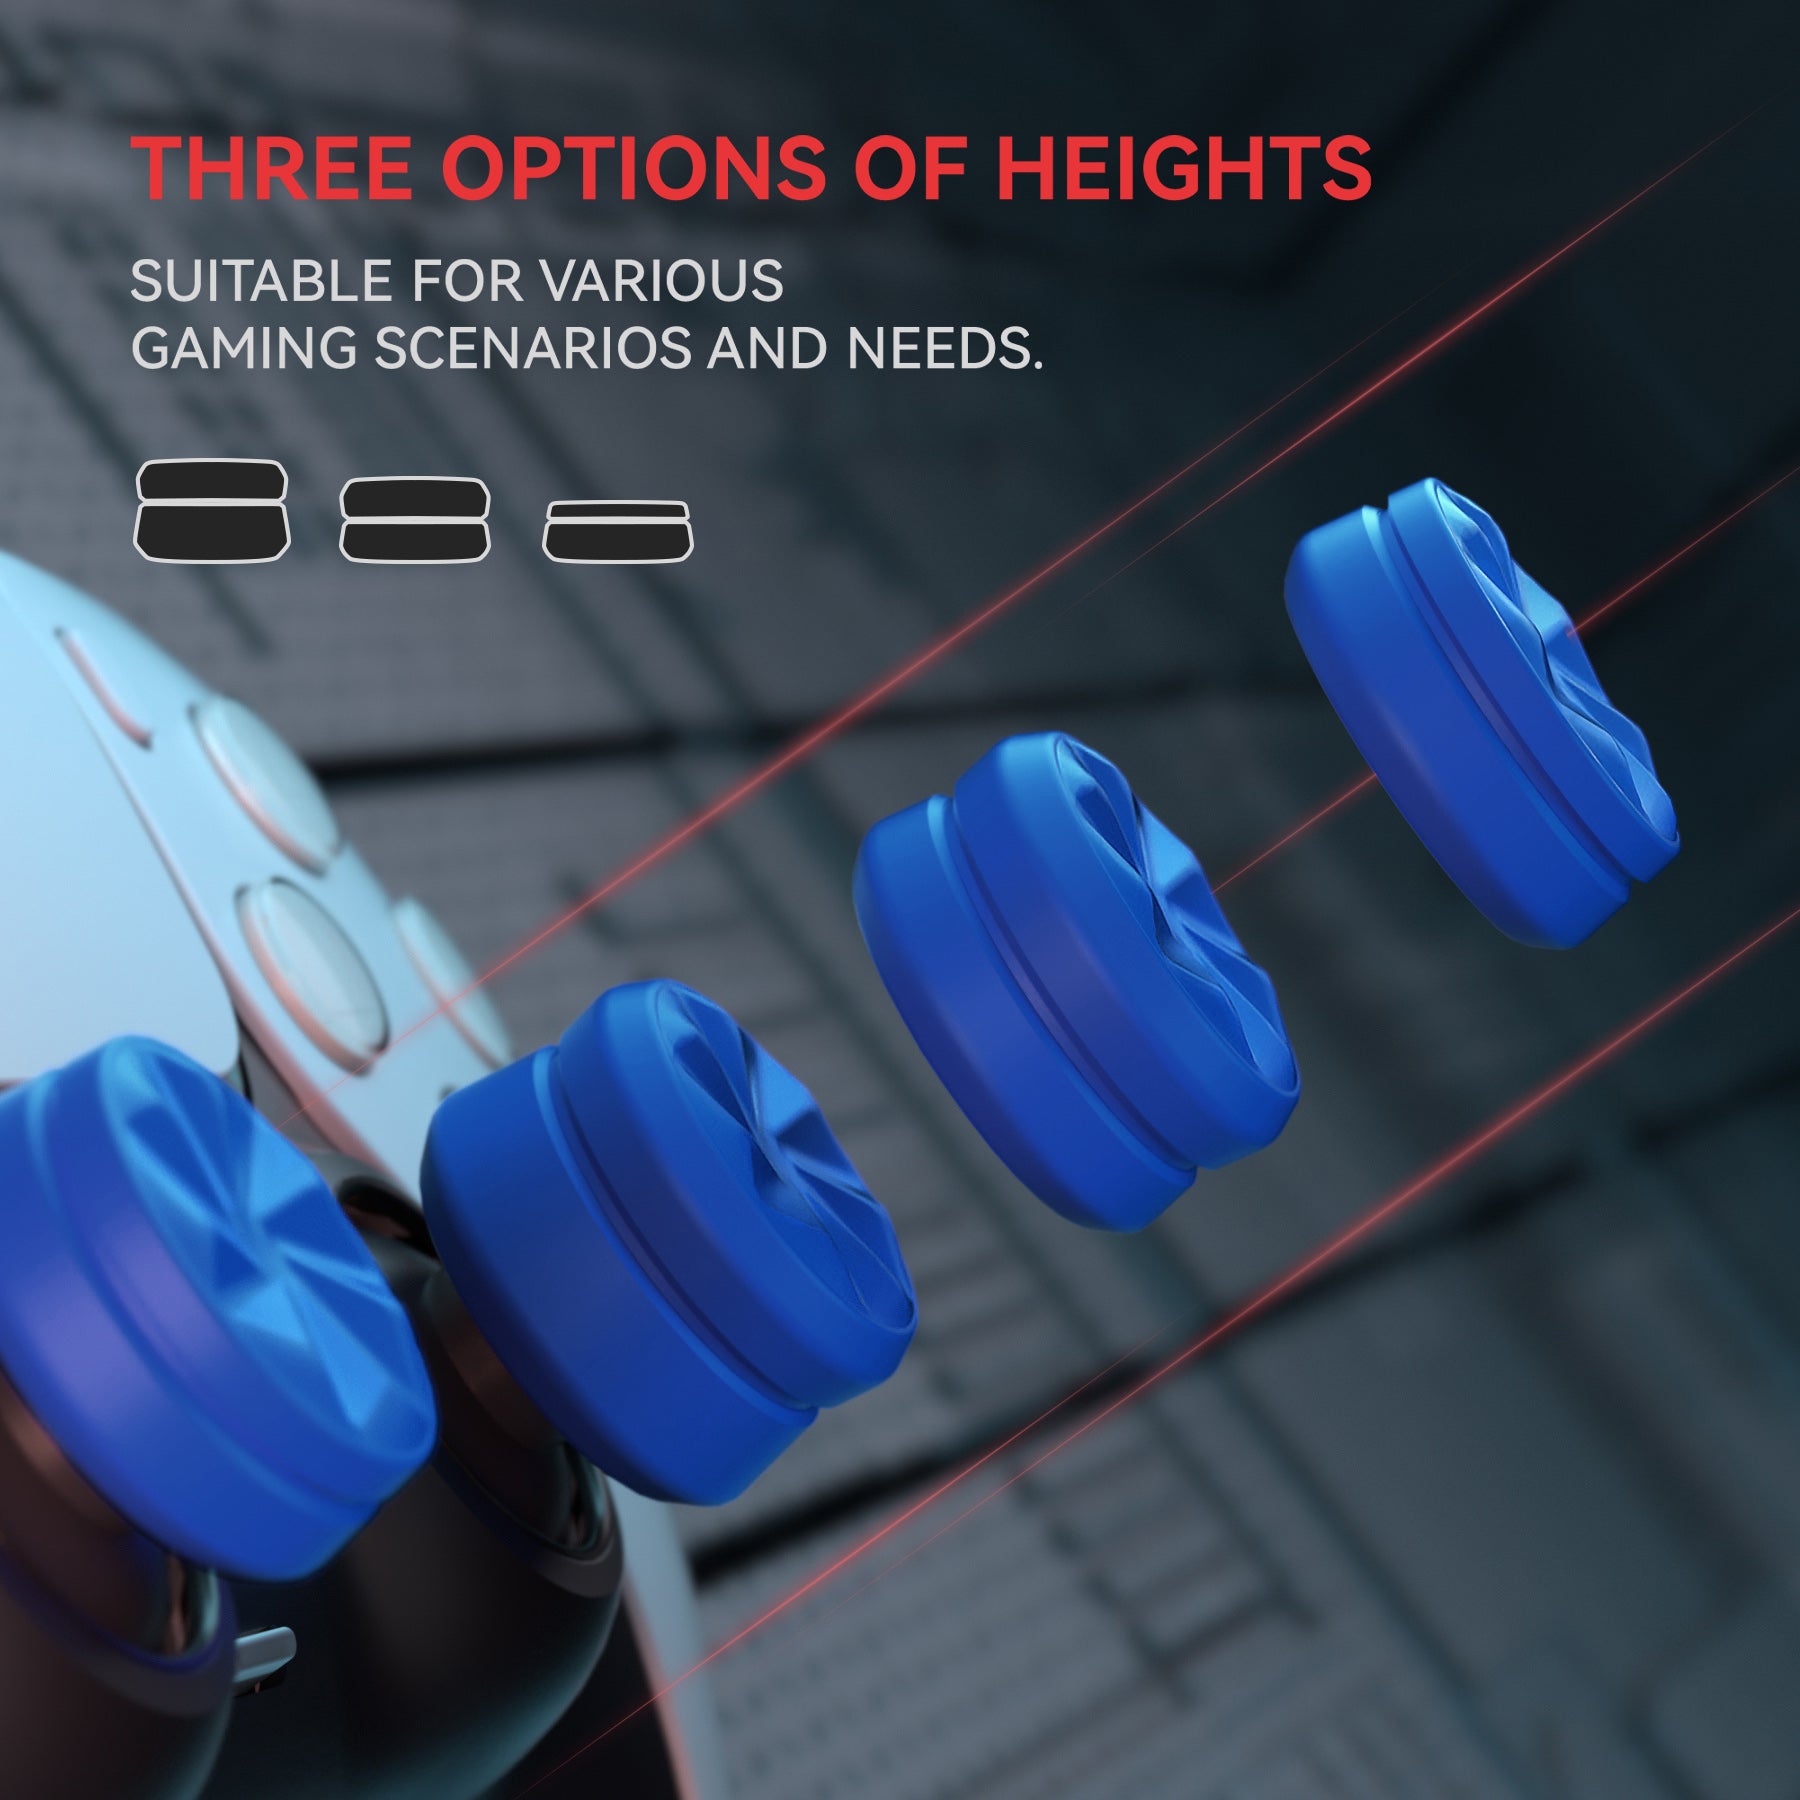 PlayVital 3 Height Hurricane Thumbs Cushion Caps Thumb Grips for ps5, for ps4, Thumbstick Grip Cover for Xbox Core Wireless Controller, Thumb Grips for Xbox One, Elite Series 2, for Switch Pro - Blue - PJM3065 PlayVital